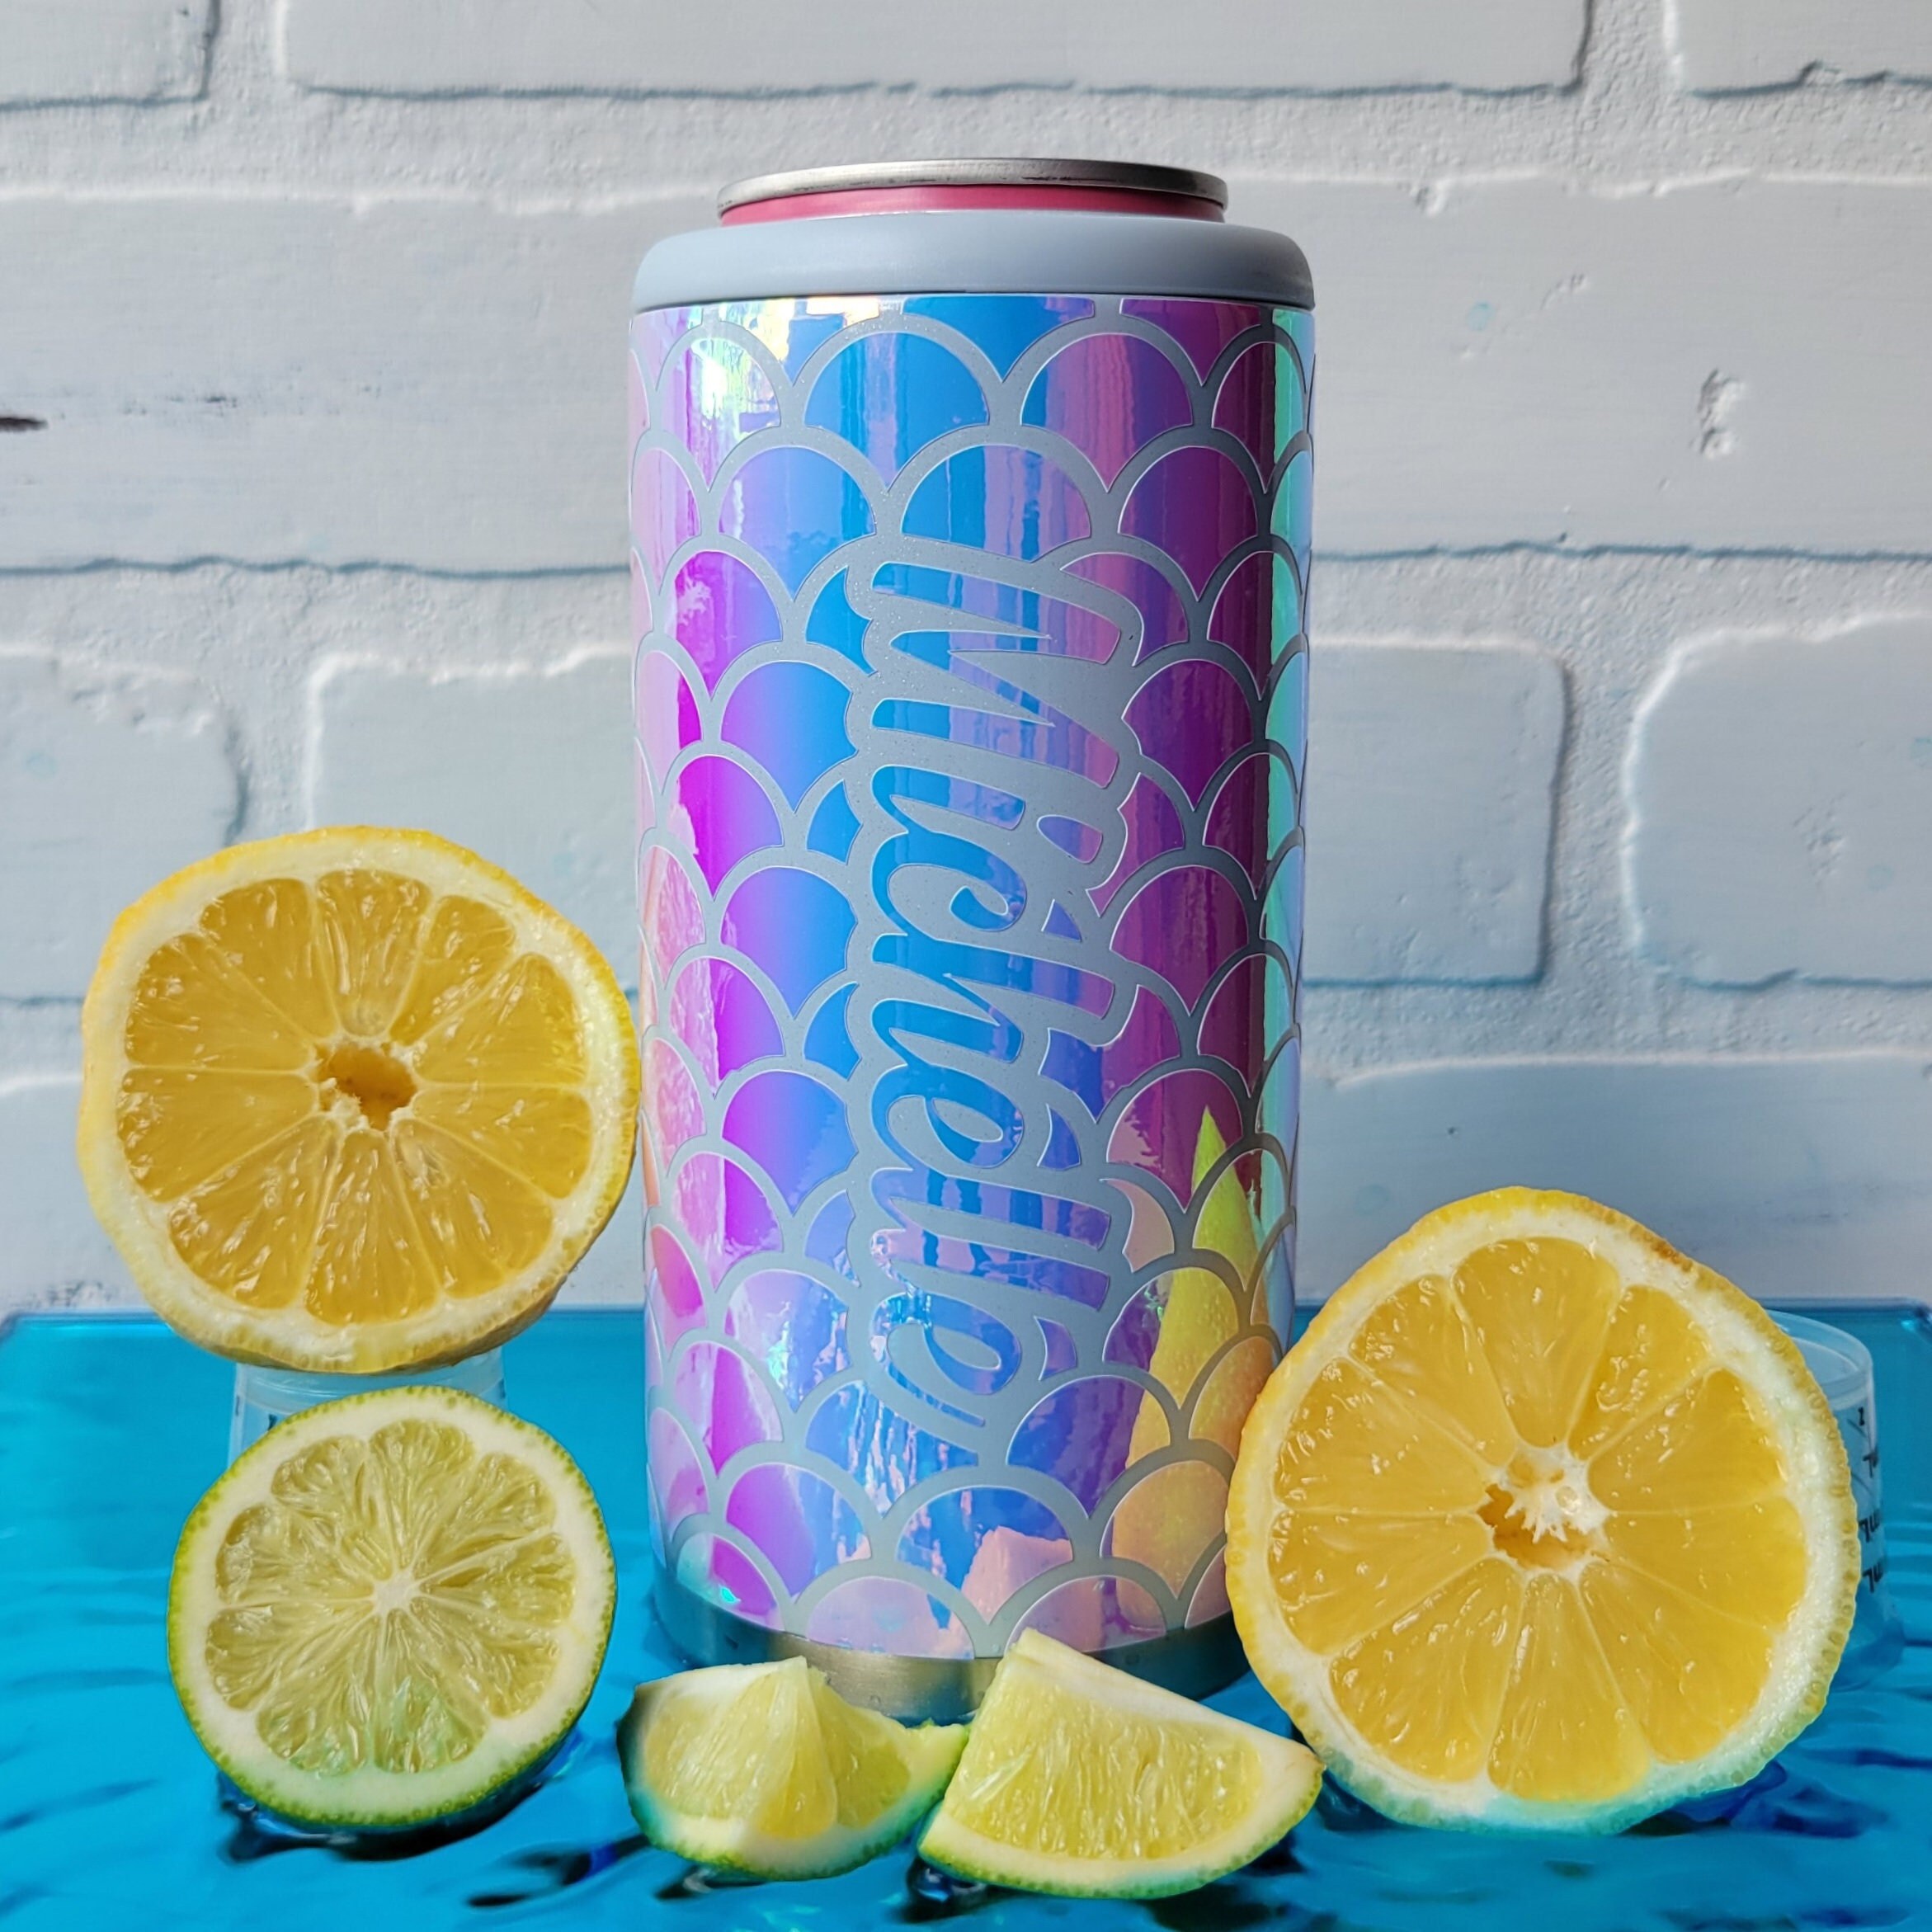 Holographic Skinny Can Cooler, Slim Can Cooler, Personalized Huggie,  Seltzer Slim Can, Hard Seltzer Cooler, Mermaid Print Slim Can Cooler 